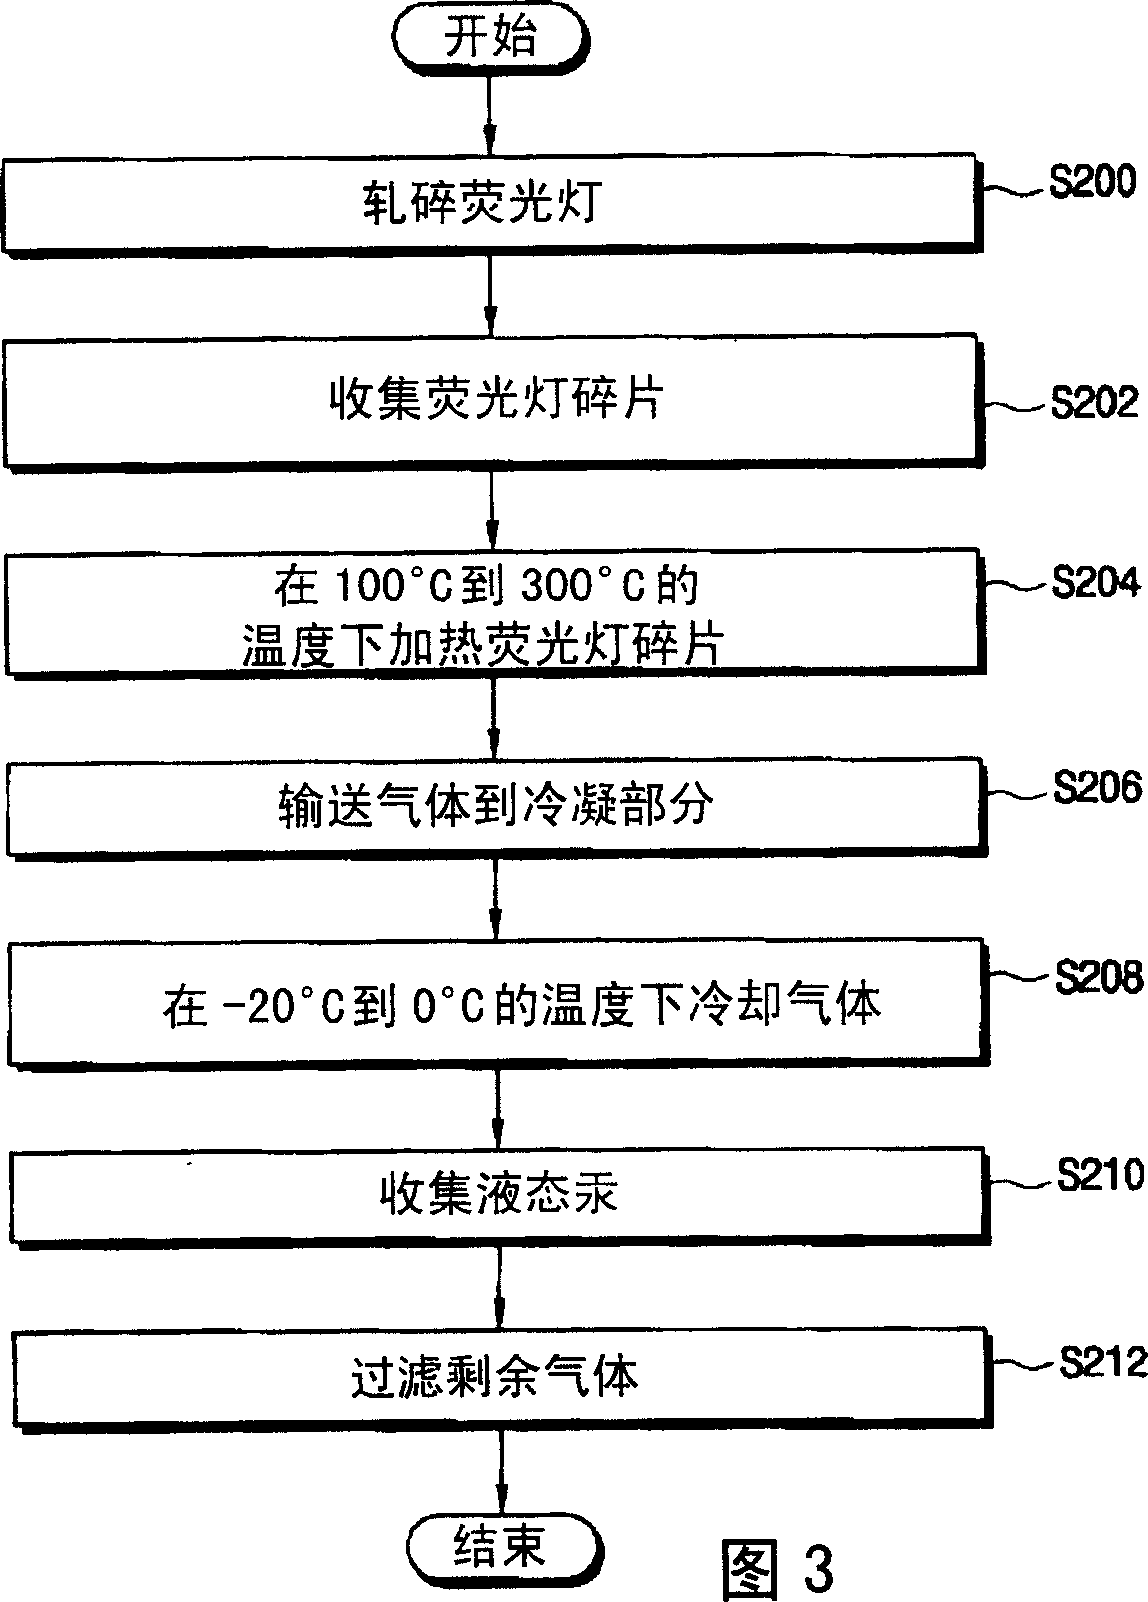 Method of recycling fluorescent lamp